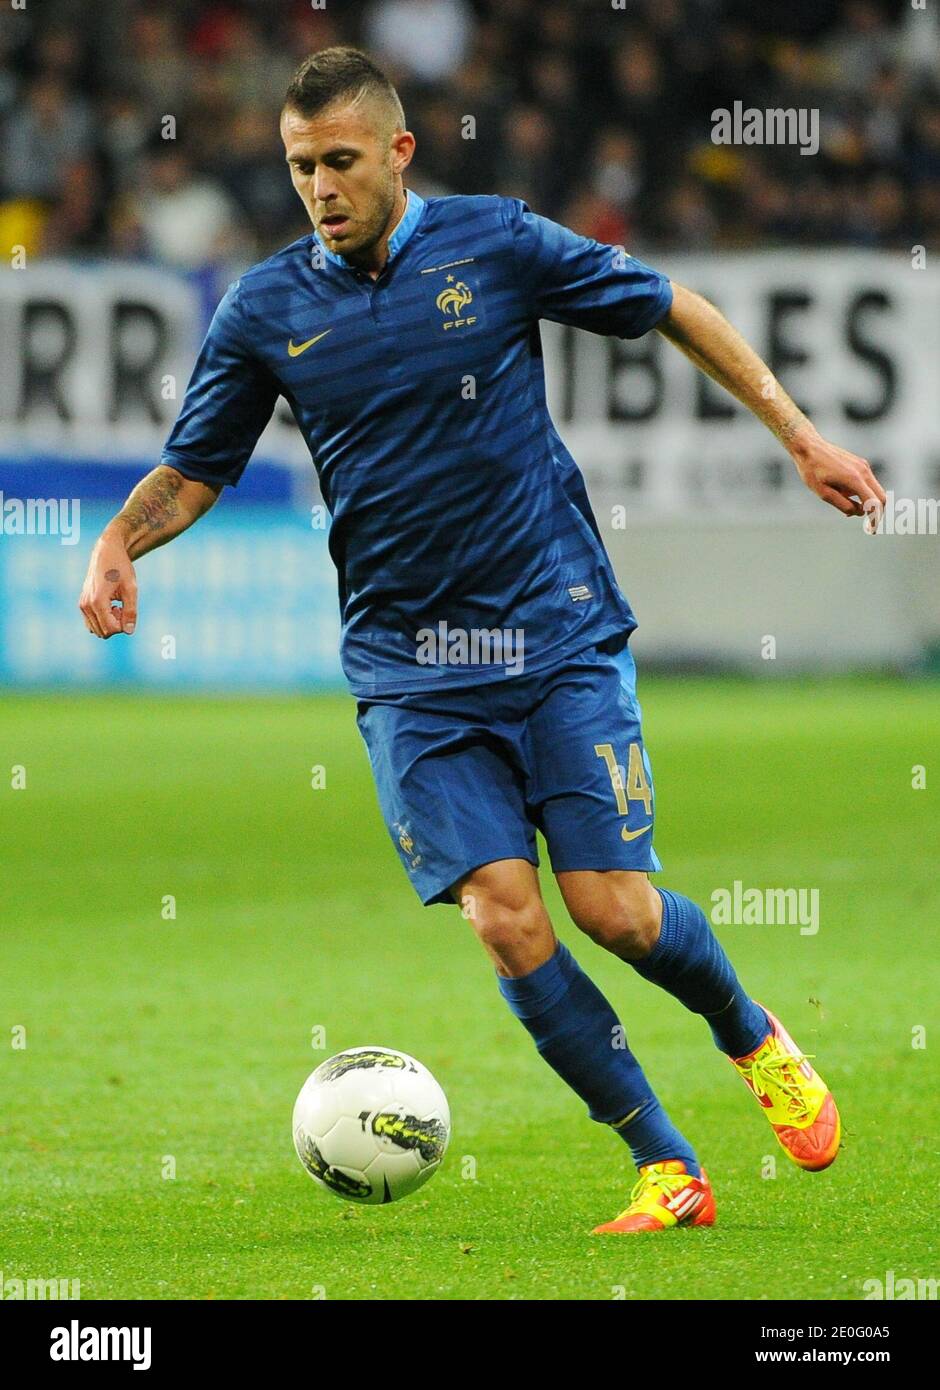 France's Jeremy Menez during an International Friendly soccer match, France Vs Estonia at MMArena stadium in Le Mans, France, on June 5, 2012. France won 4-0. Photo by ABACAPRESS.COM Stock Photo